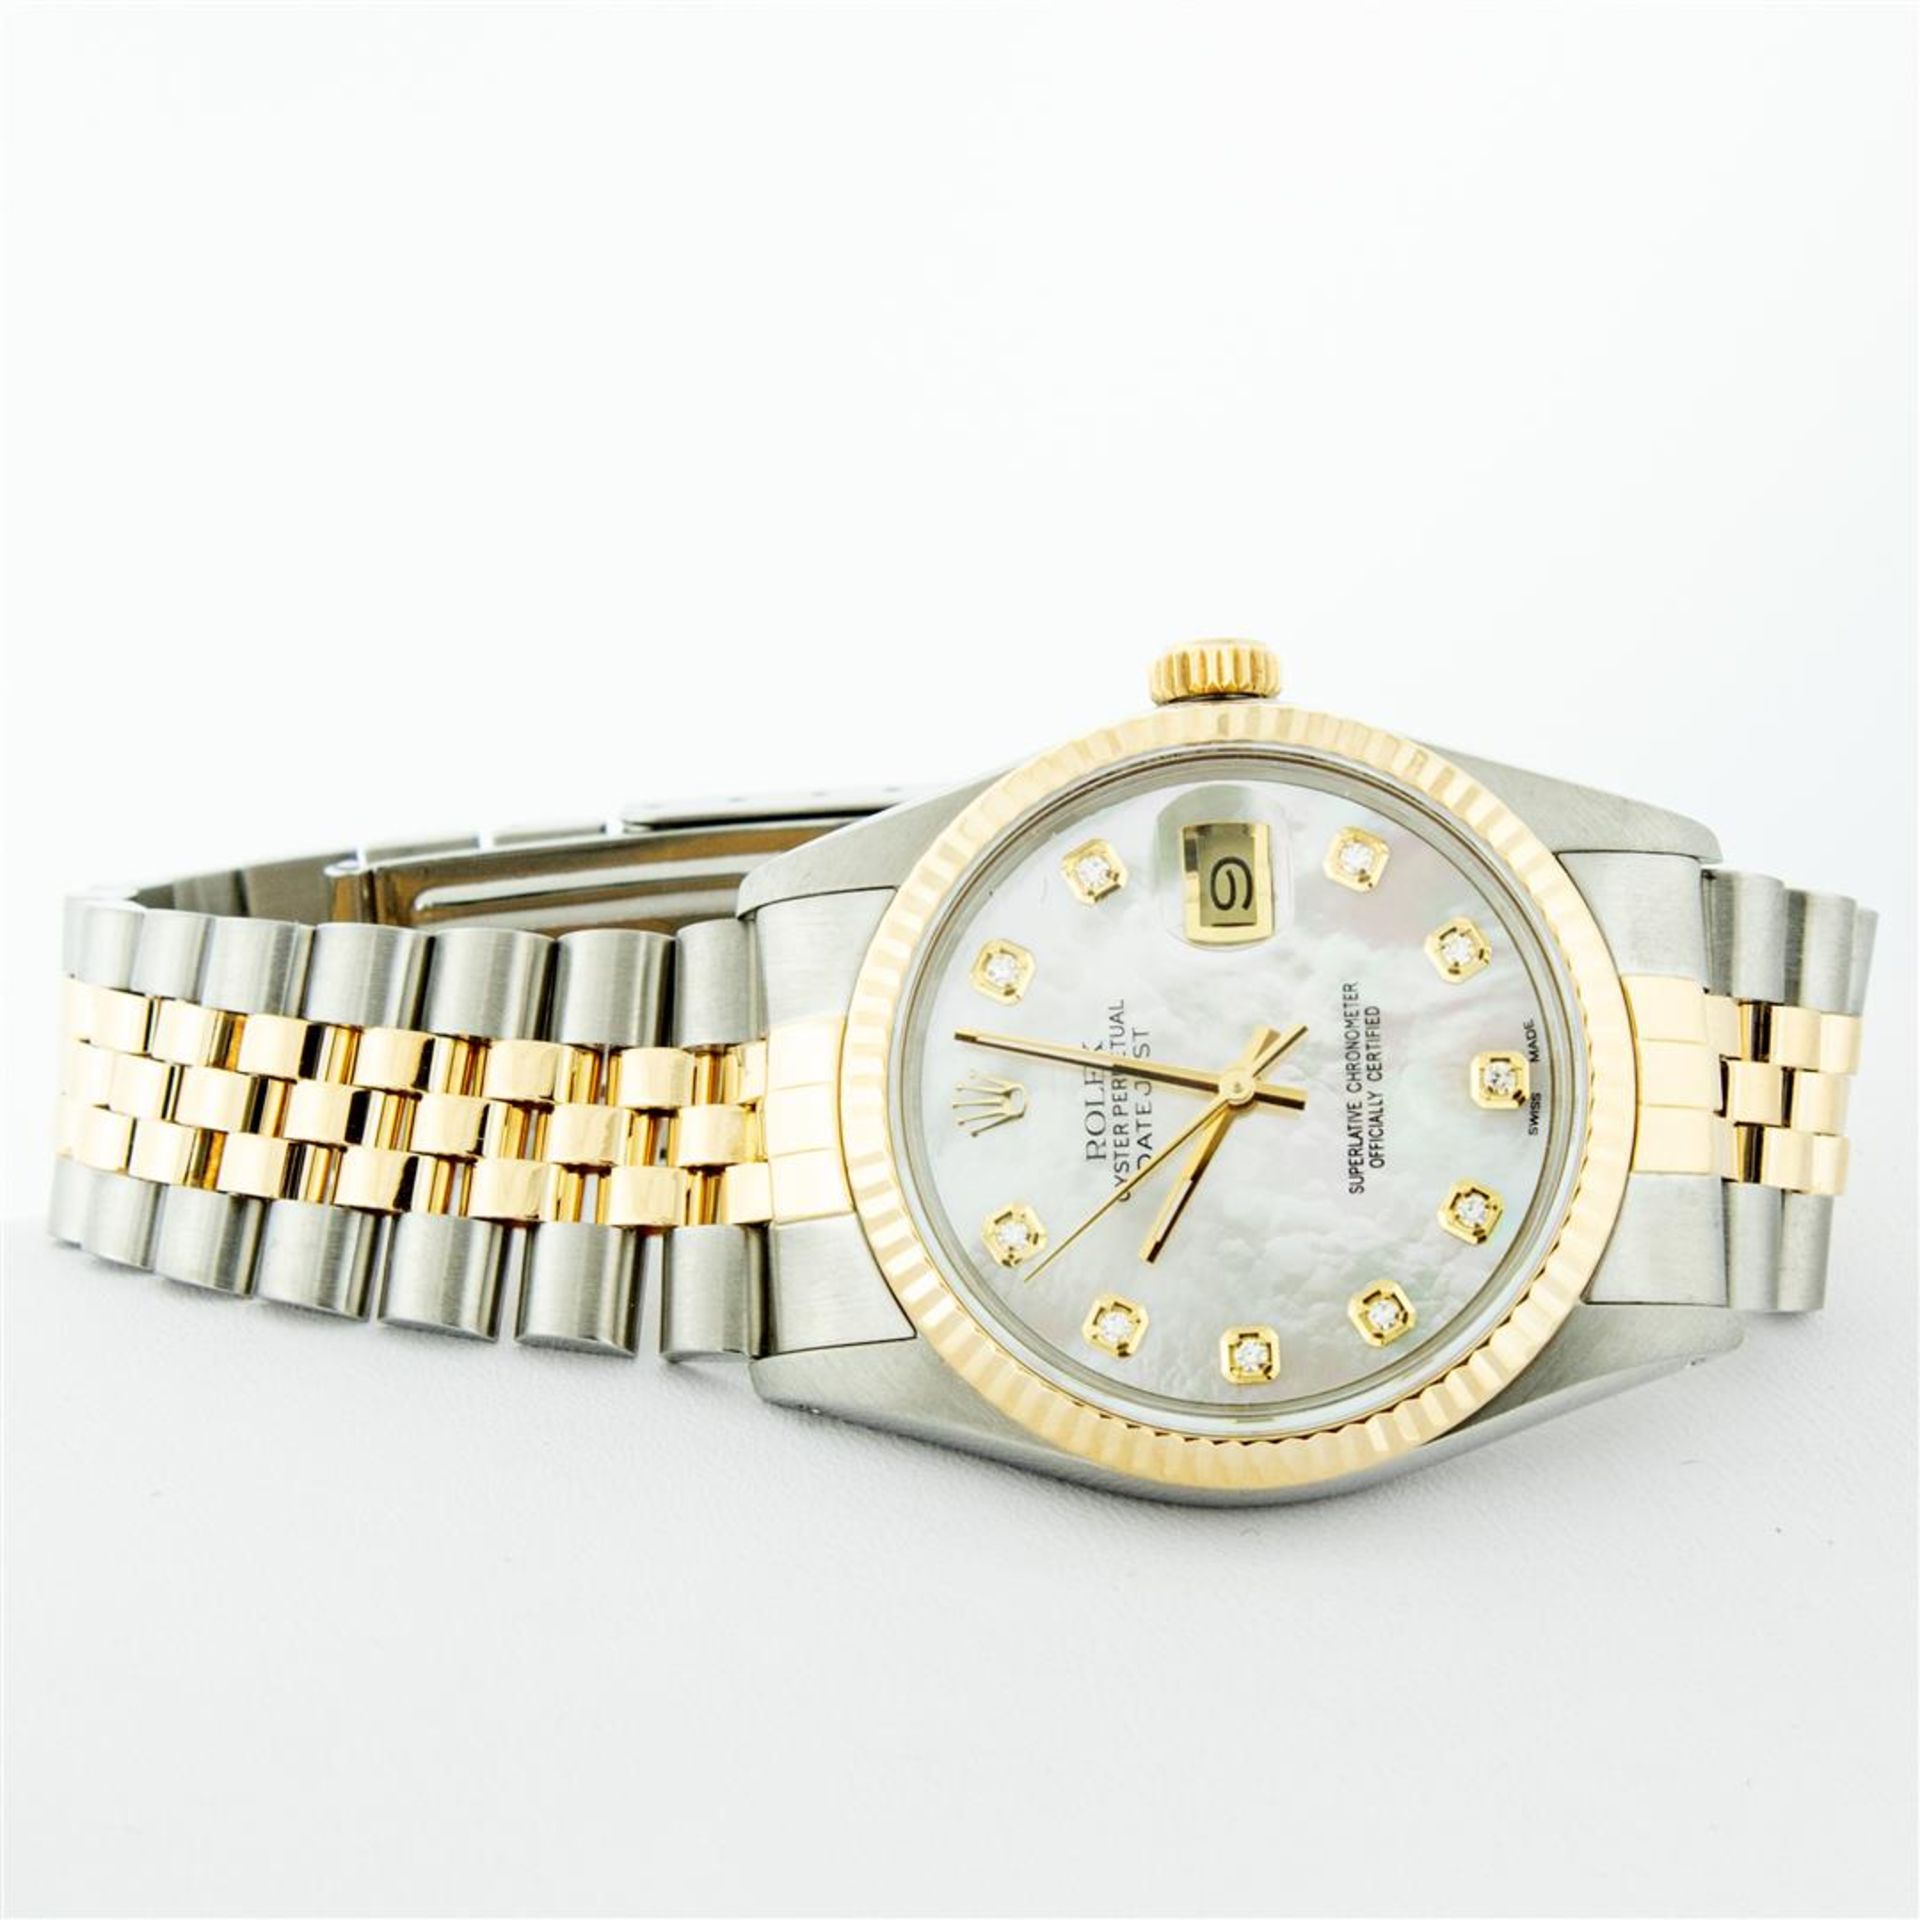 Rolex Mens 2 Tone Mother Of Pearl VS Diamond 36MM Datejust Wristwatch - Image 7 of 18